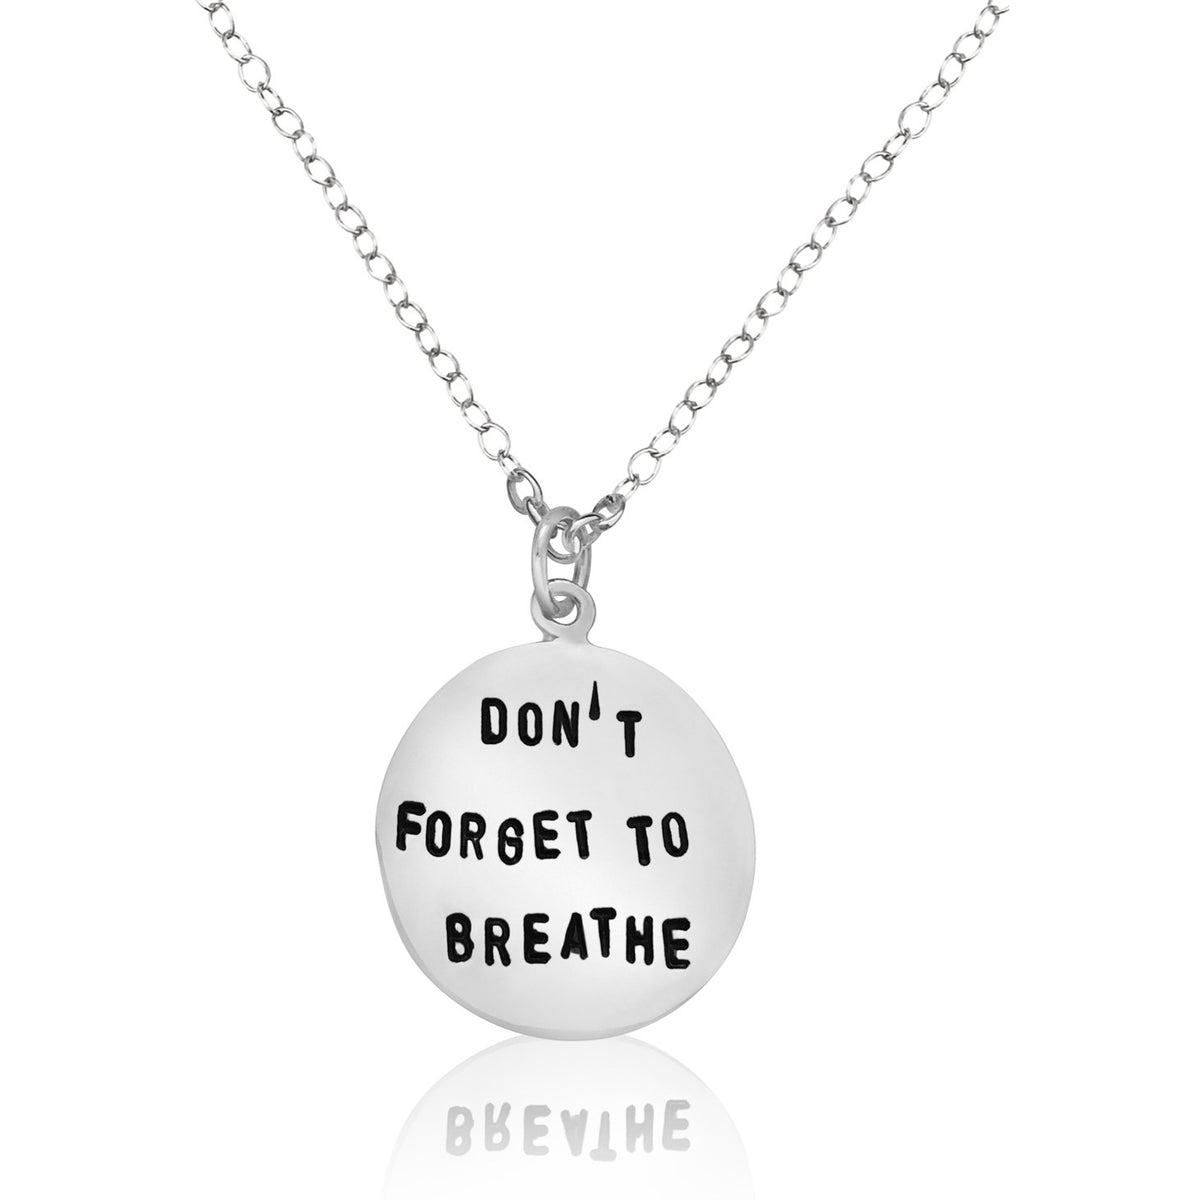 Sterling silver necklace with a meaningful reminder: DON'T FORGET TO BREATHE